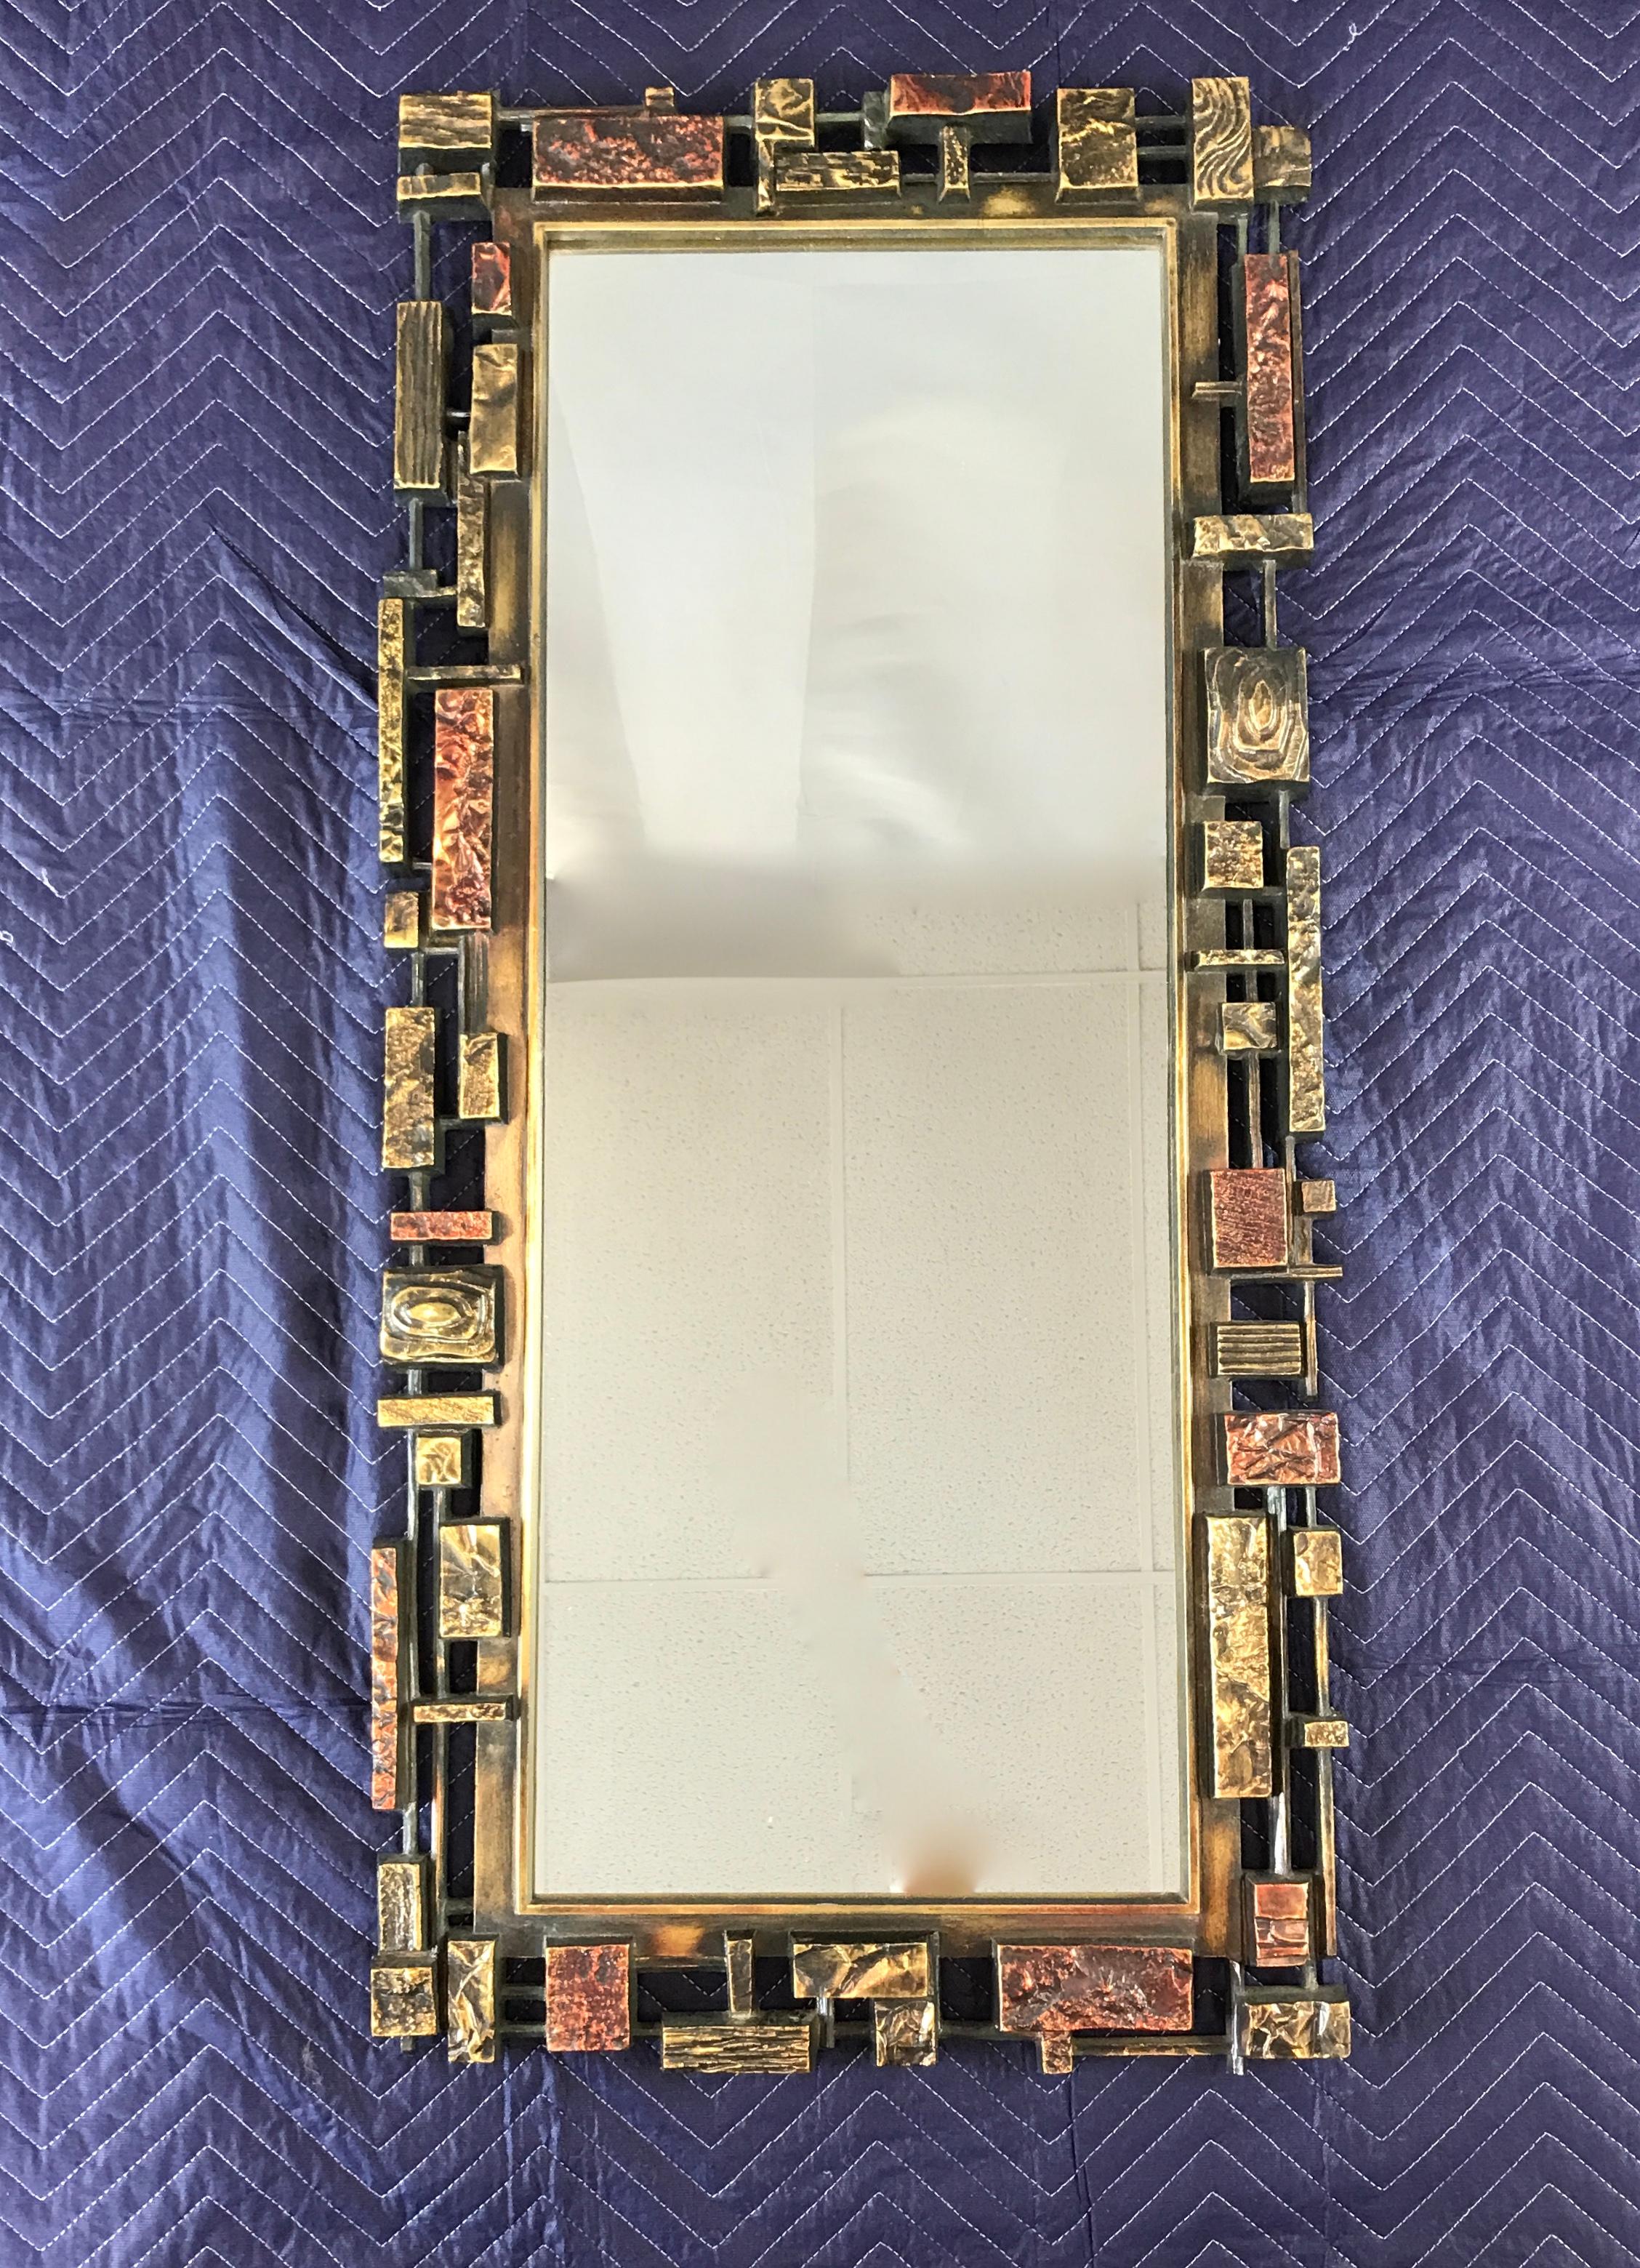 American Syroco Brutalist Wall Mirror with Matching Brutalist Shelf Copper, Gold, Black